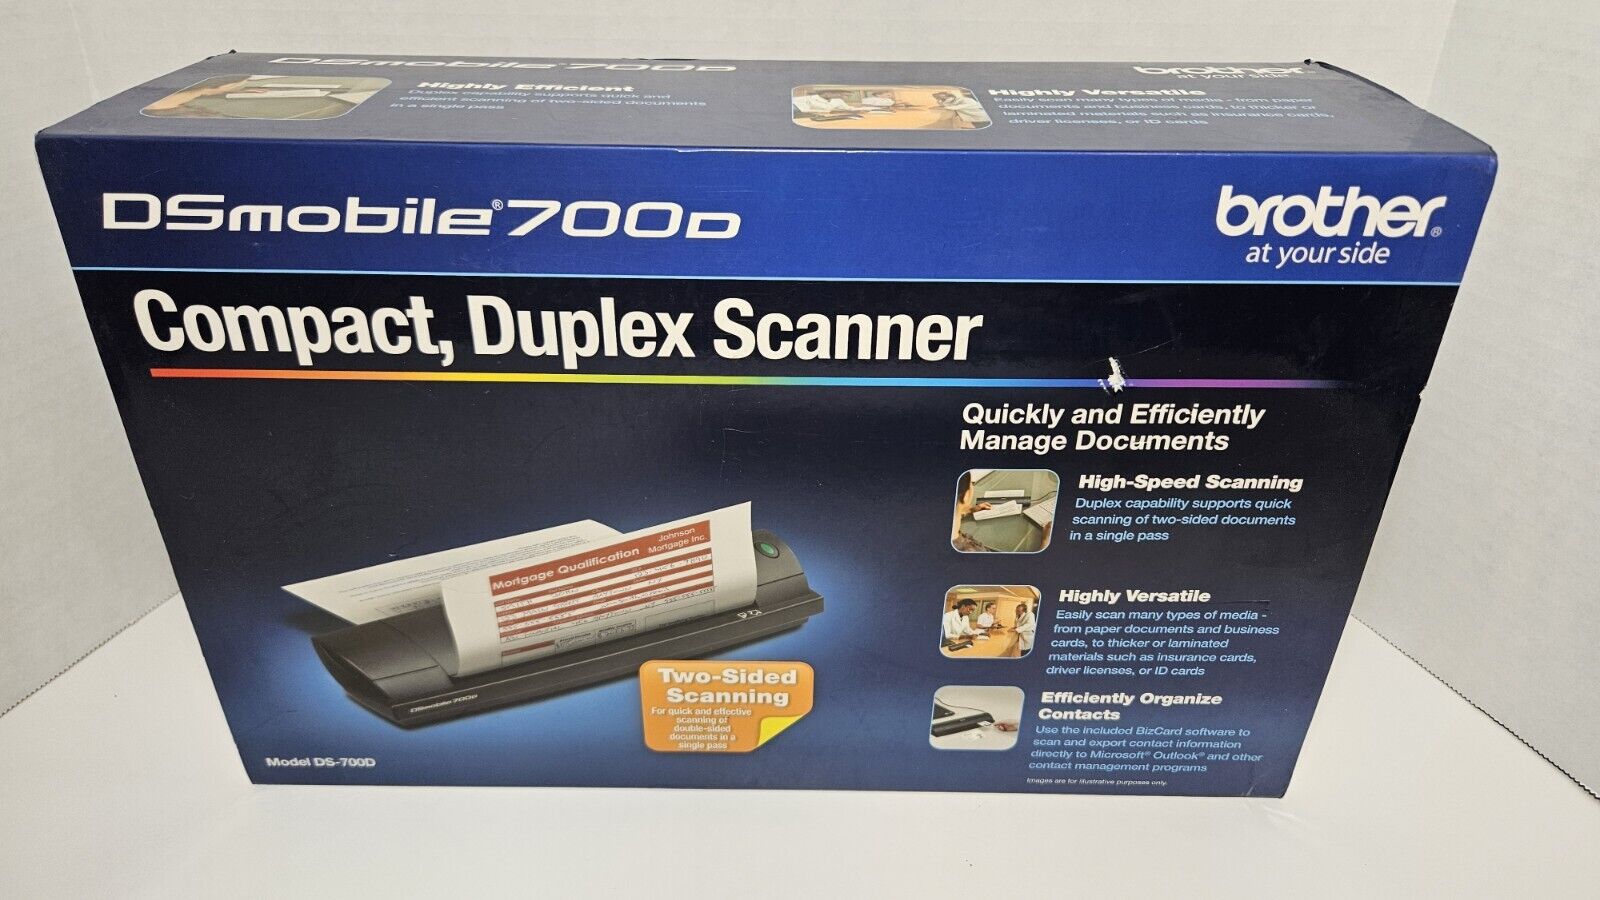 Brother Scanner DSmobile 700D Compact, Duplex, Two-Sided Double Scanning In Box